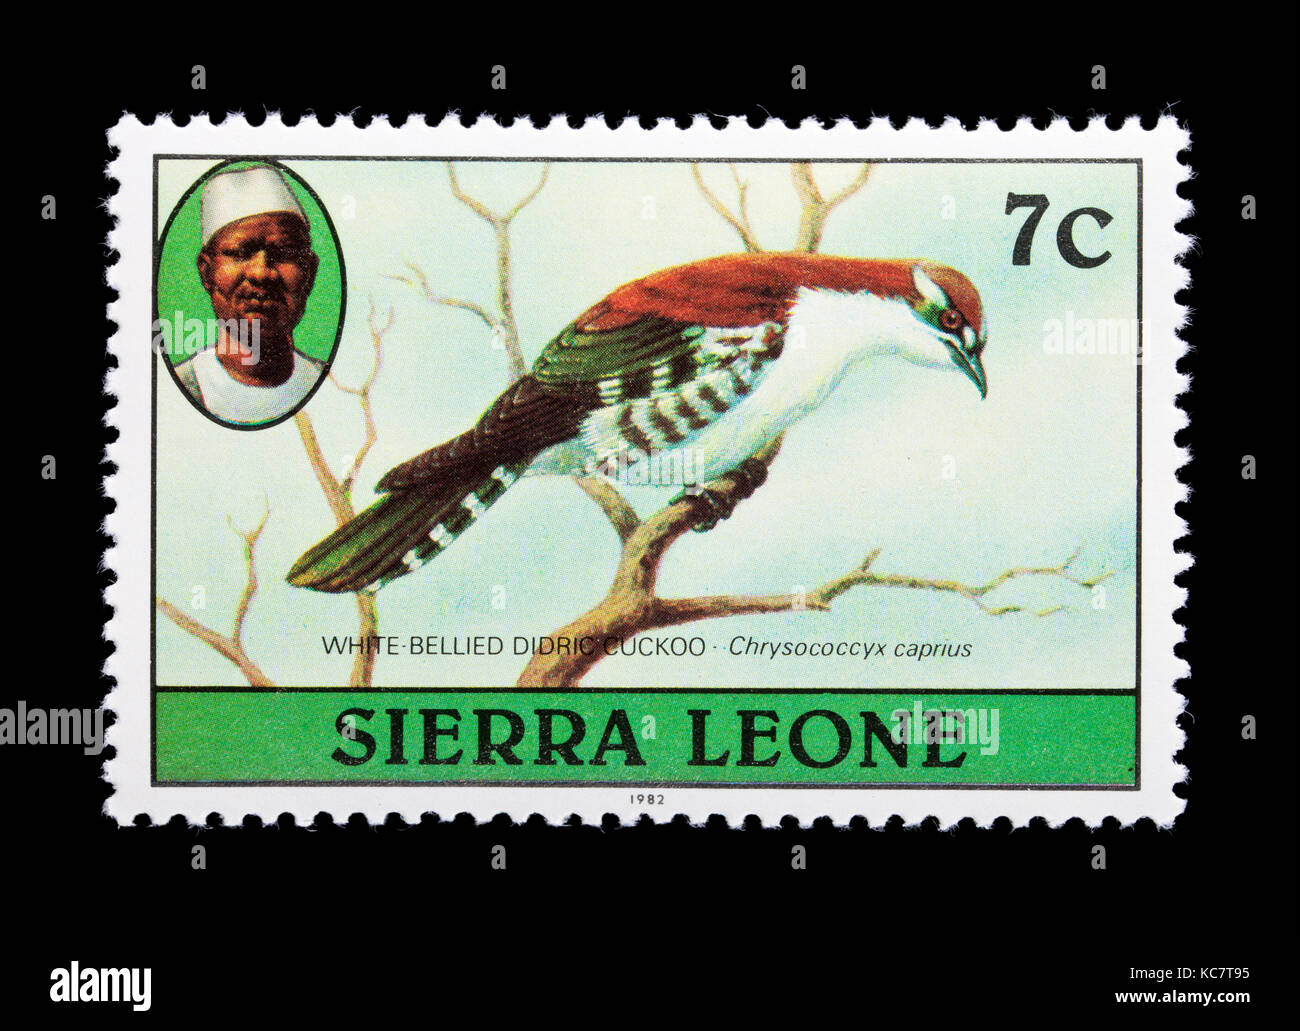 Postage stamp from Sierra Leone depicting a white-bellied didric cuckoo (Chrysococcyx caprius) Stock Photo